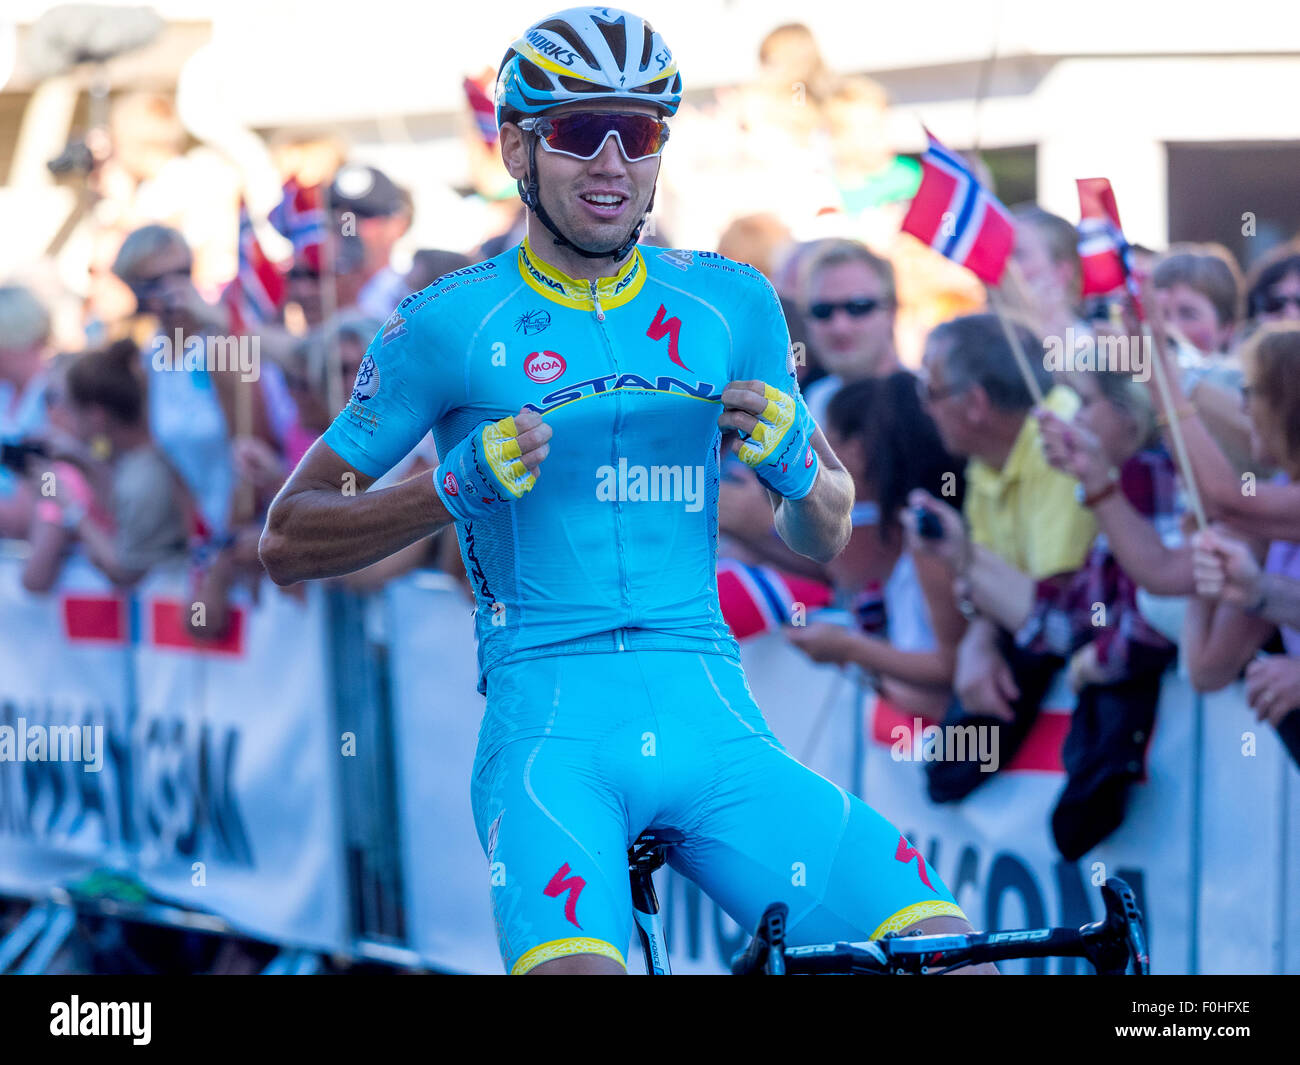 Narvik, Norway, 16th August 2015. Rein Taaramae from Estonia cycling for  Astana Pro Team was the overall winner of the 3rd edition of Arctic Race of  Norway. The 4th stage of Arctic